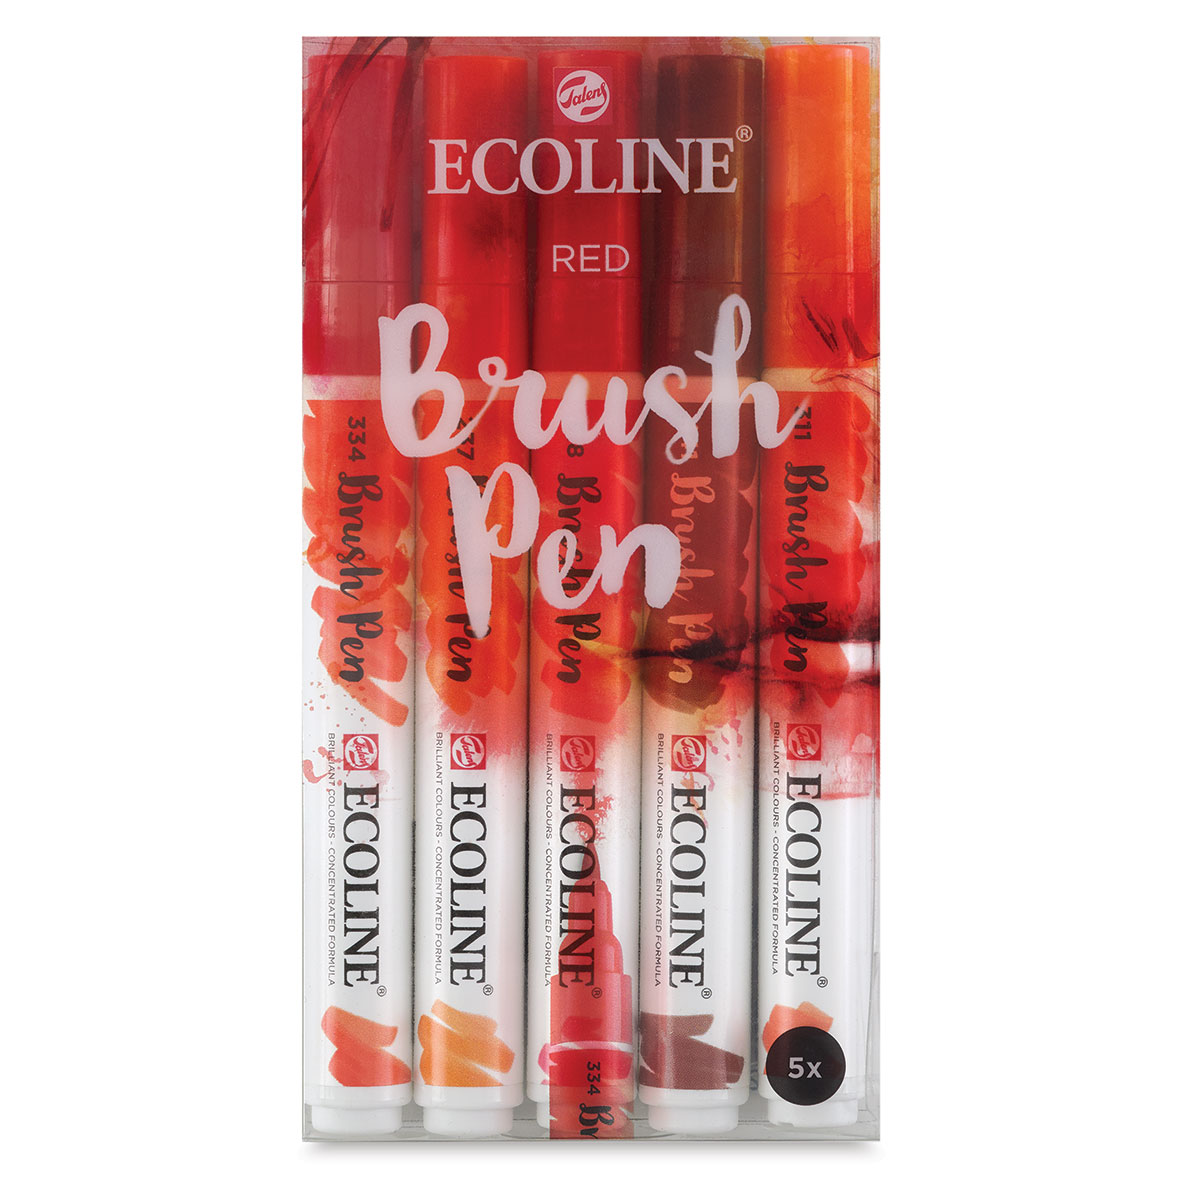 Royal Talens Ecoline Brush Pen Water Color Markers - Set of 10